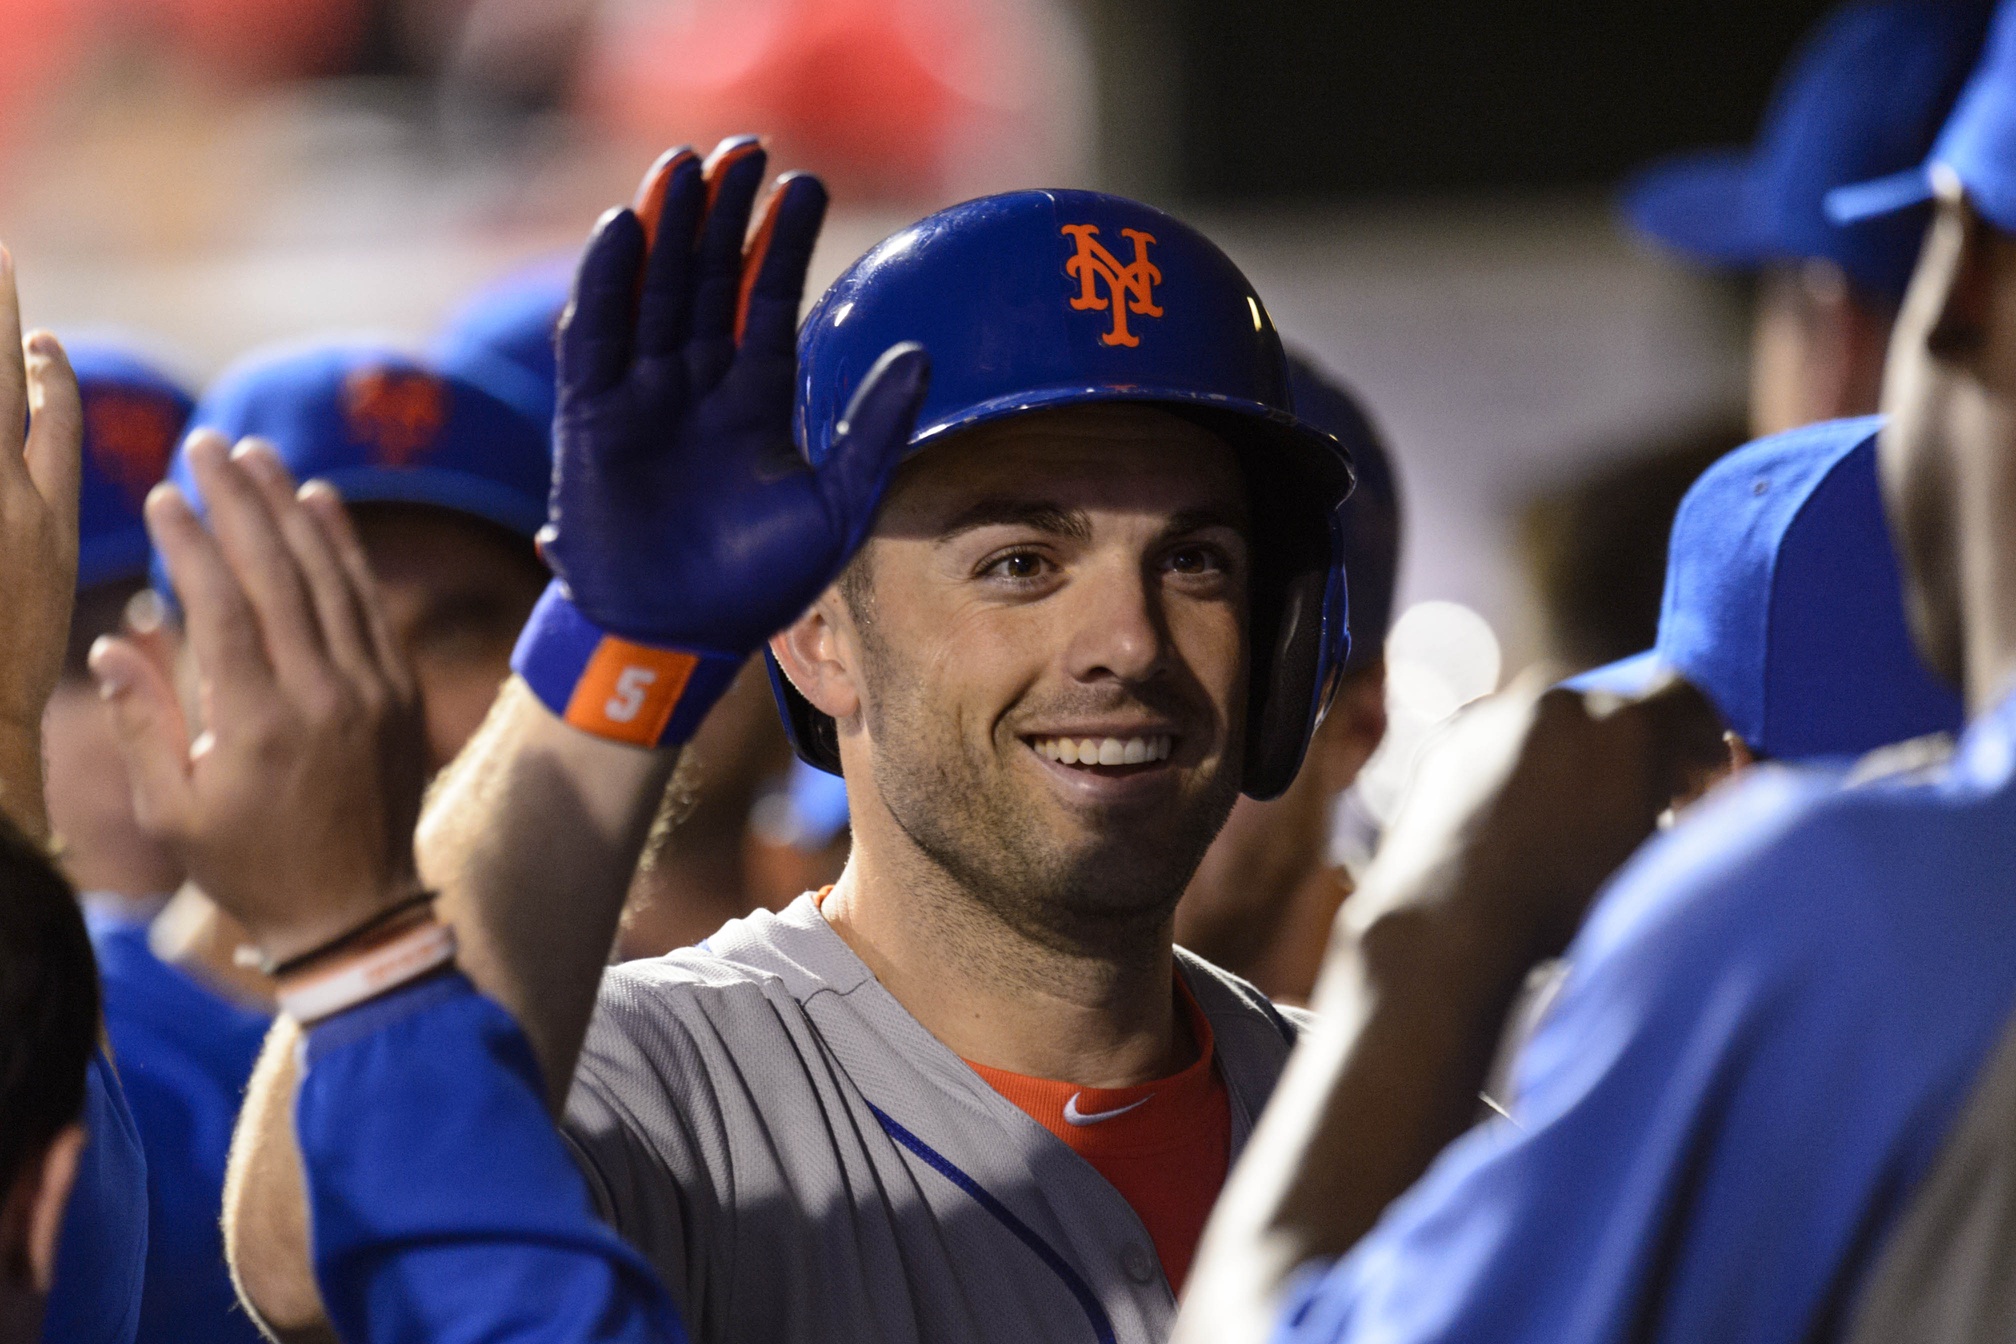 wright 221 homers